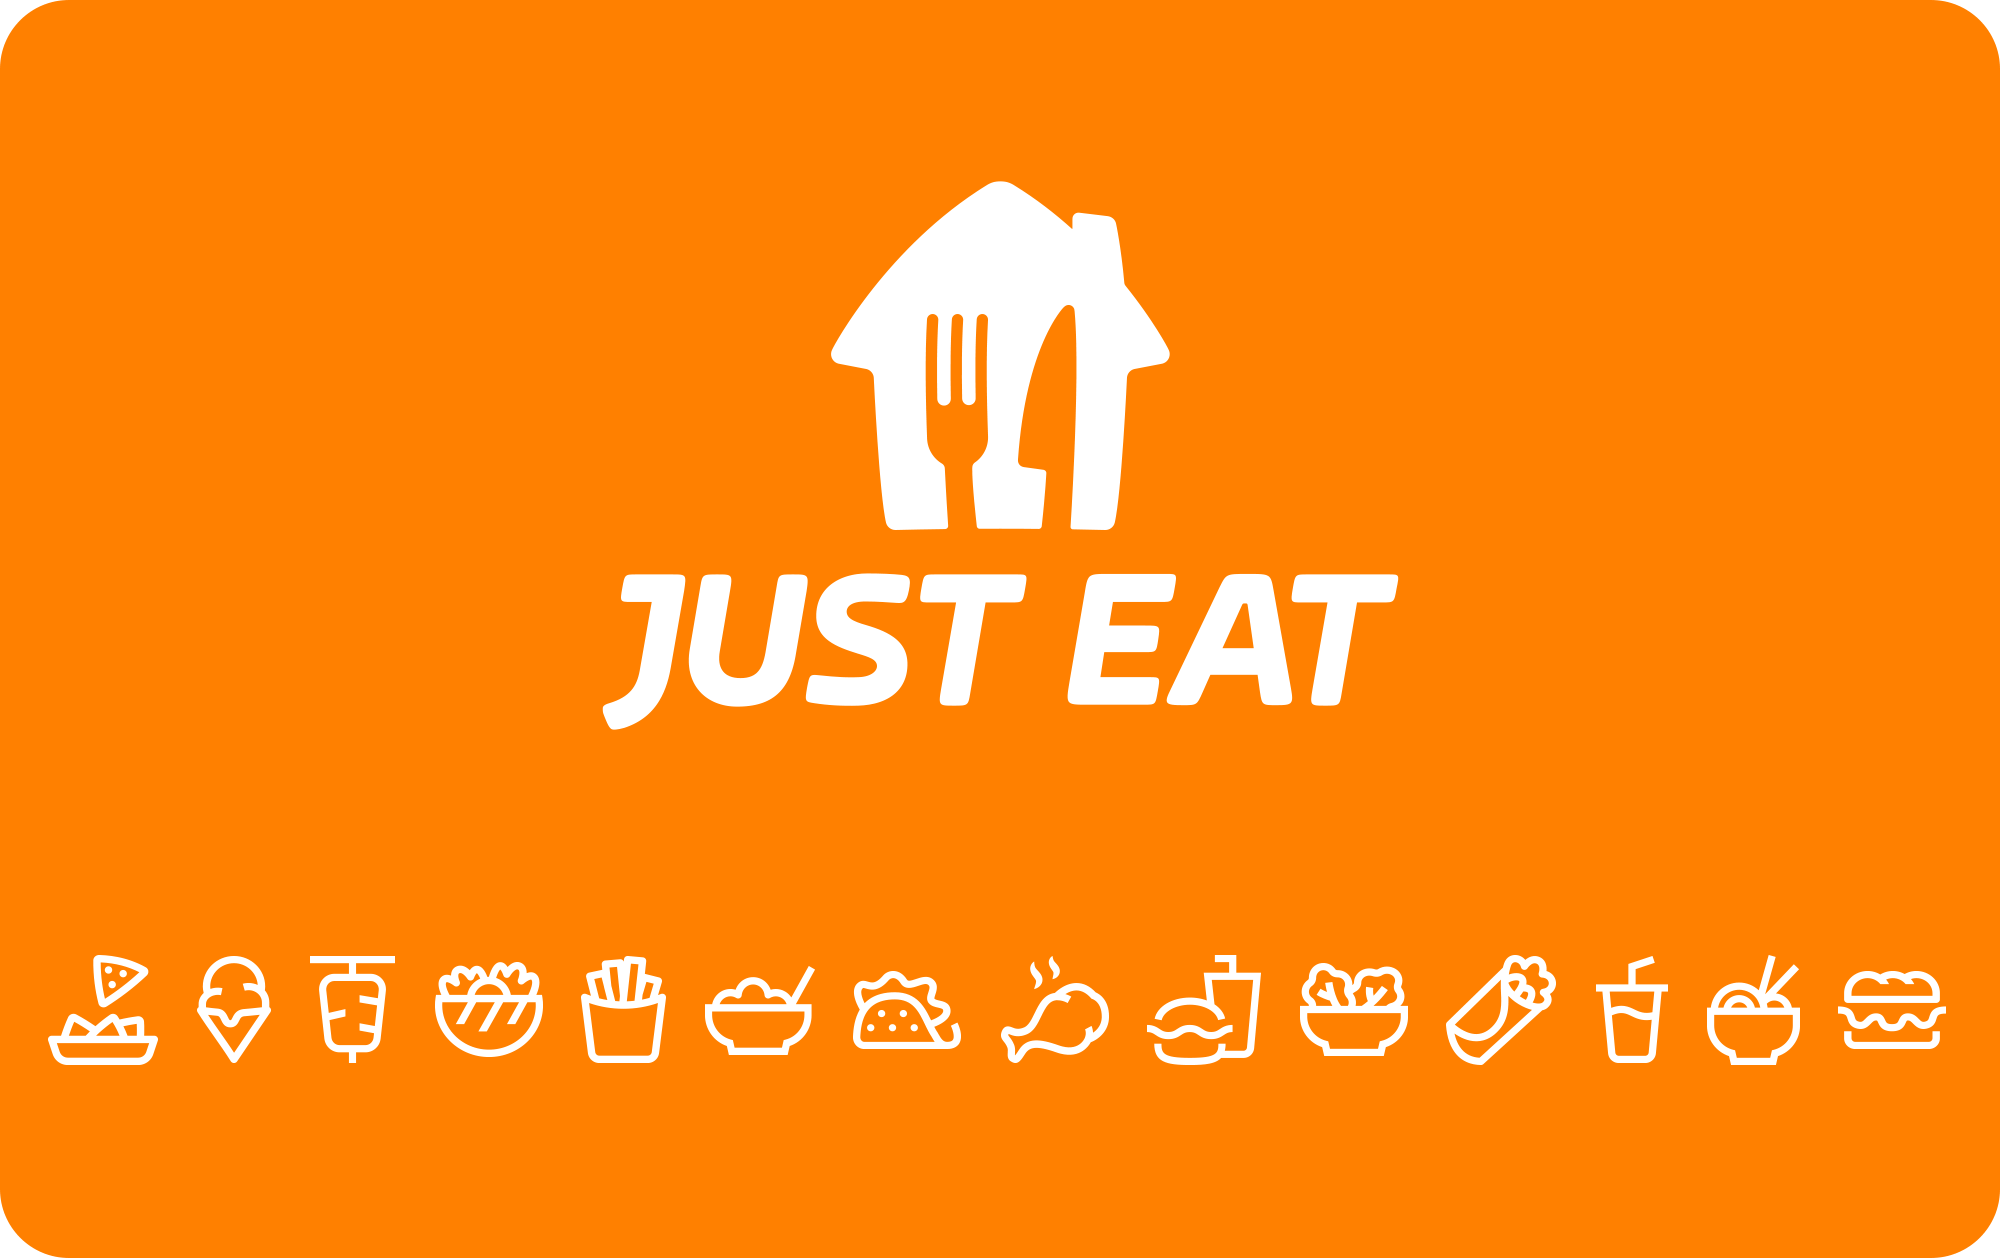 [$ 14.05] Just Eat £10 Gift Card UK